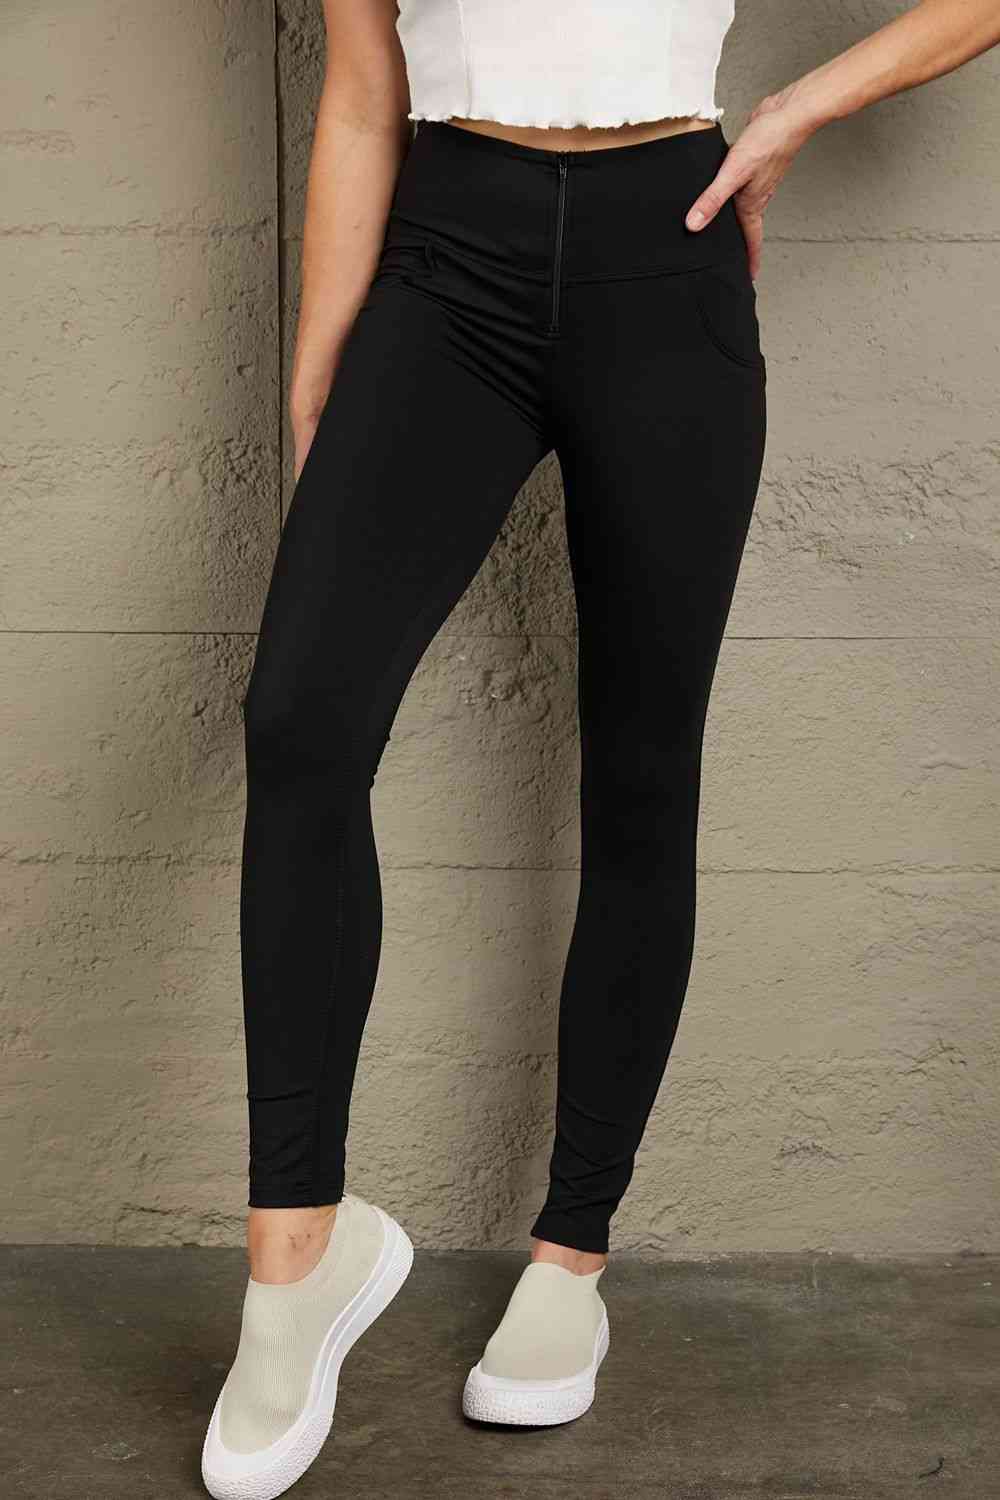 Dim Gray Baeful Zip Detail Skinny Long Jeans Sentient Beauty Fashions Apparel & Accessories